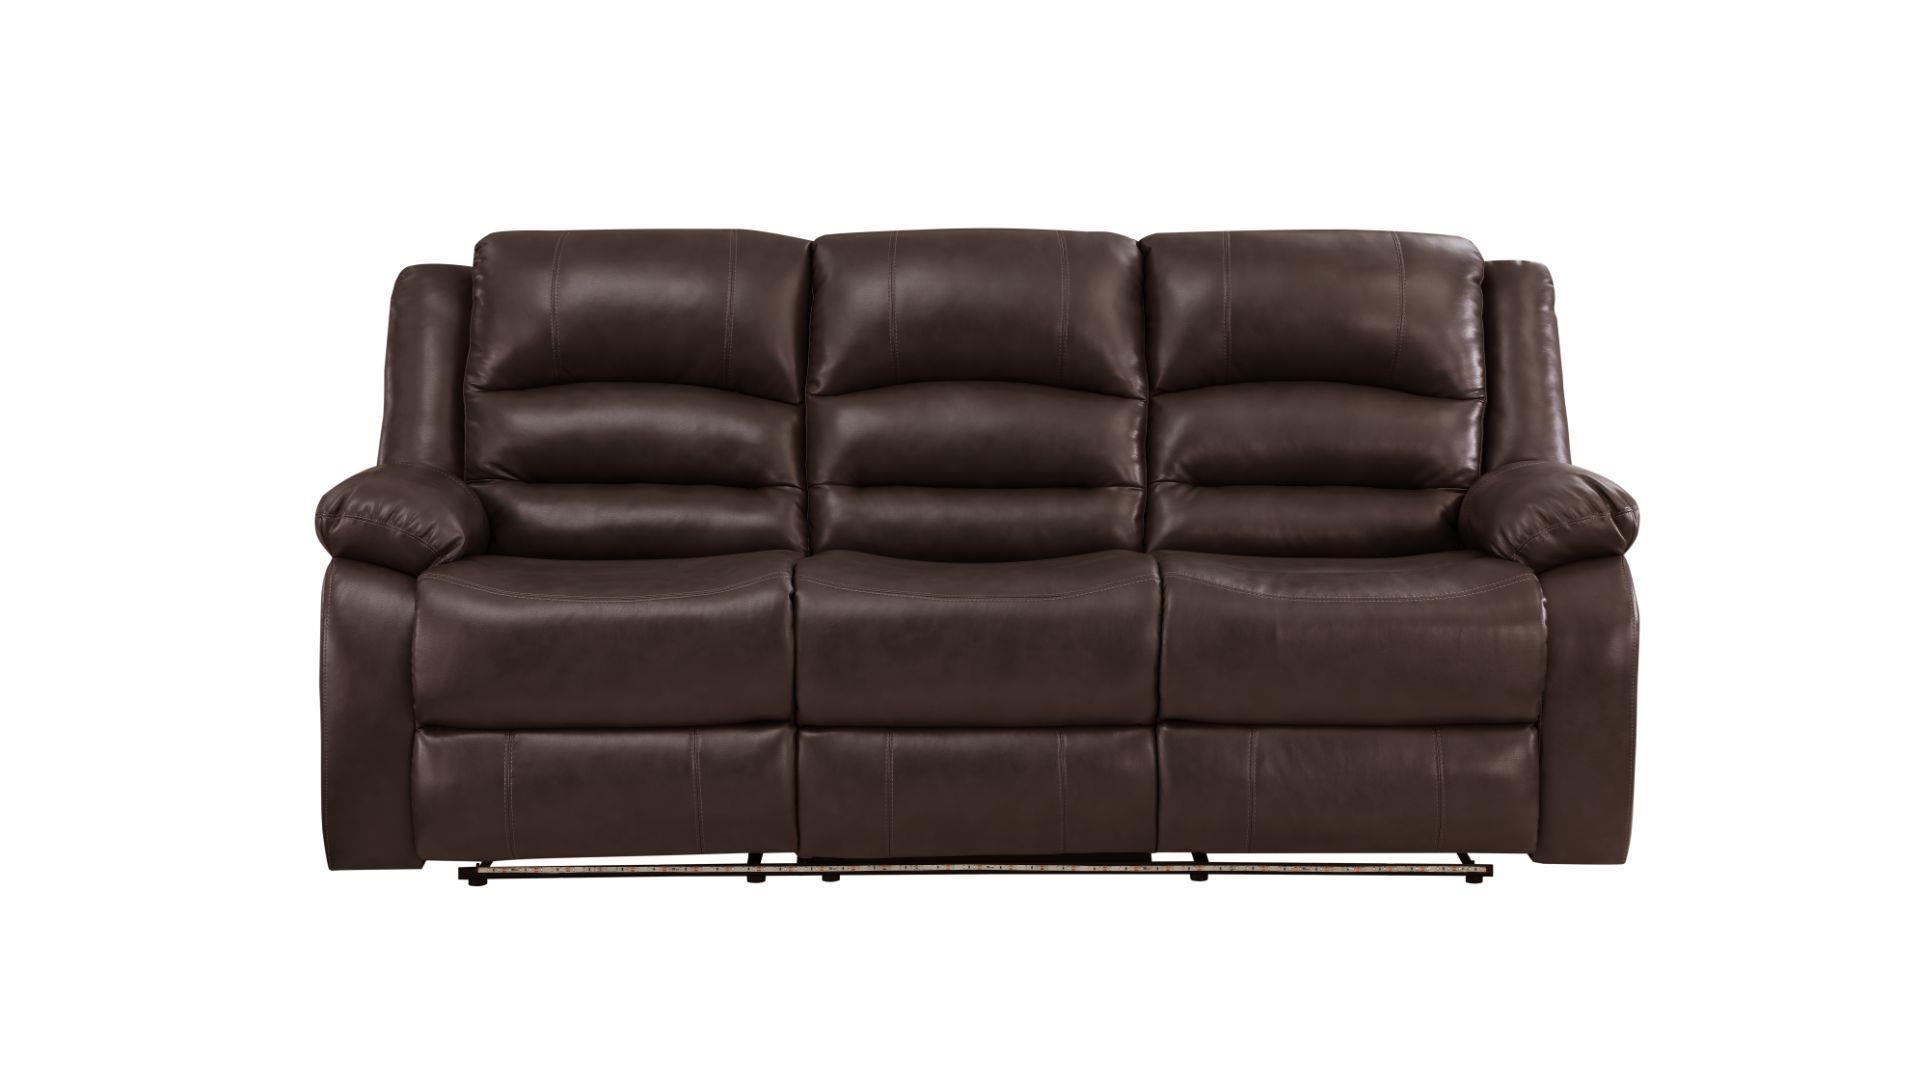 Contemporary, Modern Recliner Sofa MARTIN BR MARTIN-BR-S in Brown Faux Leather